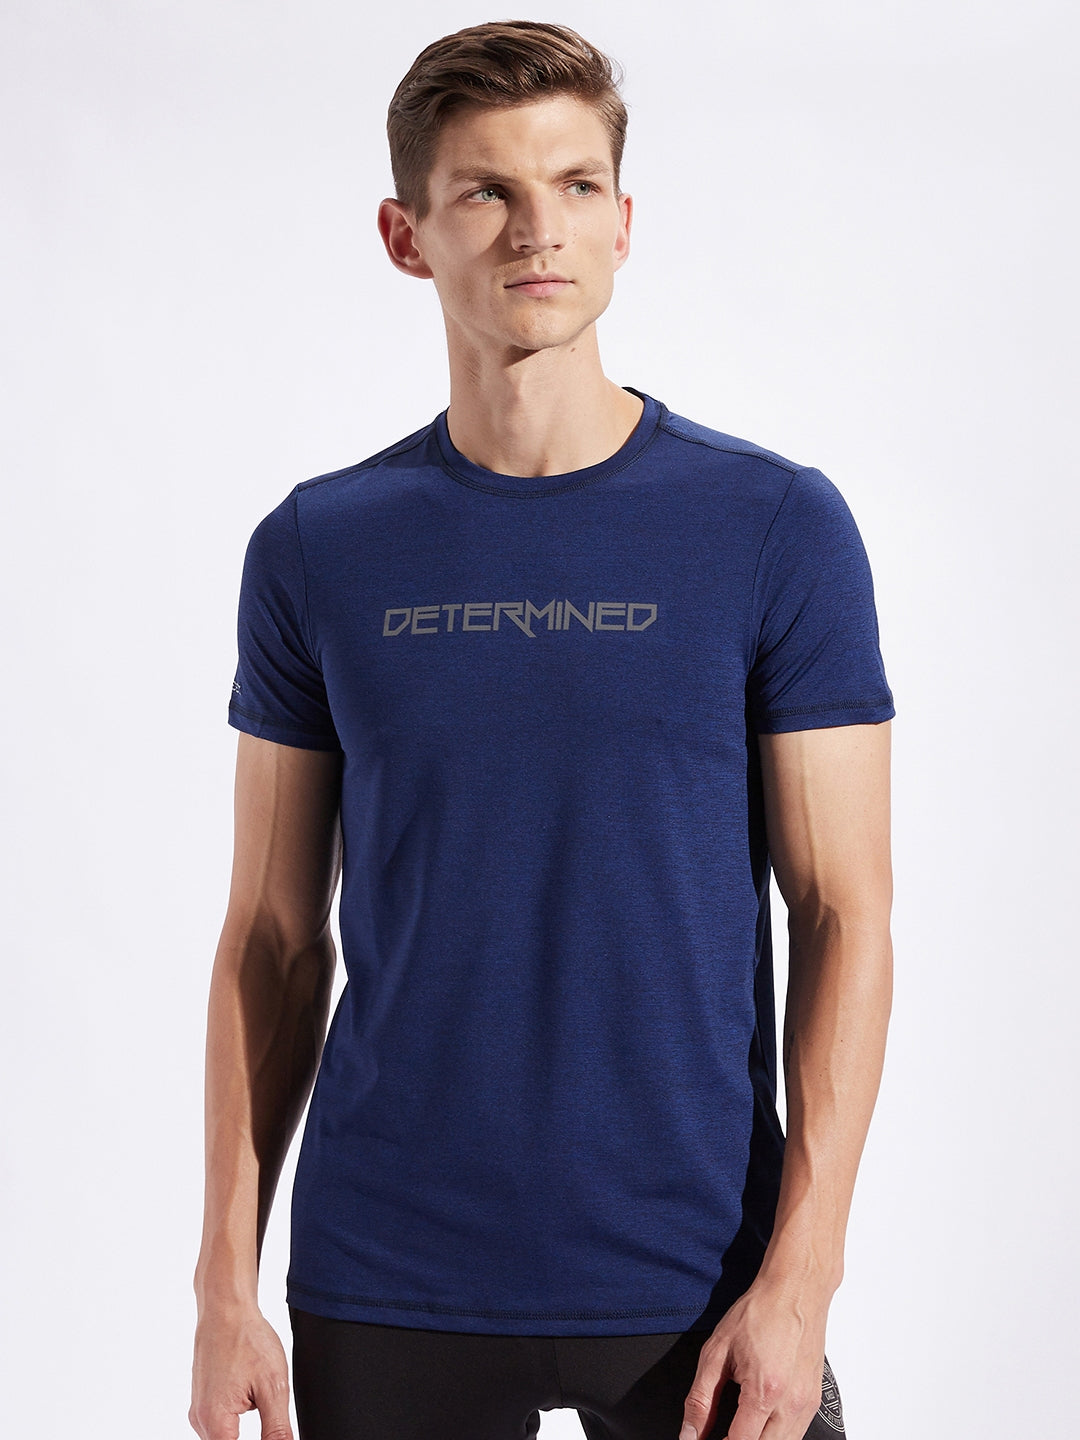 Determined Stretchable T-shirt 2